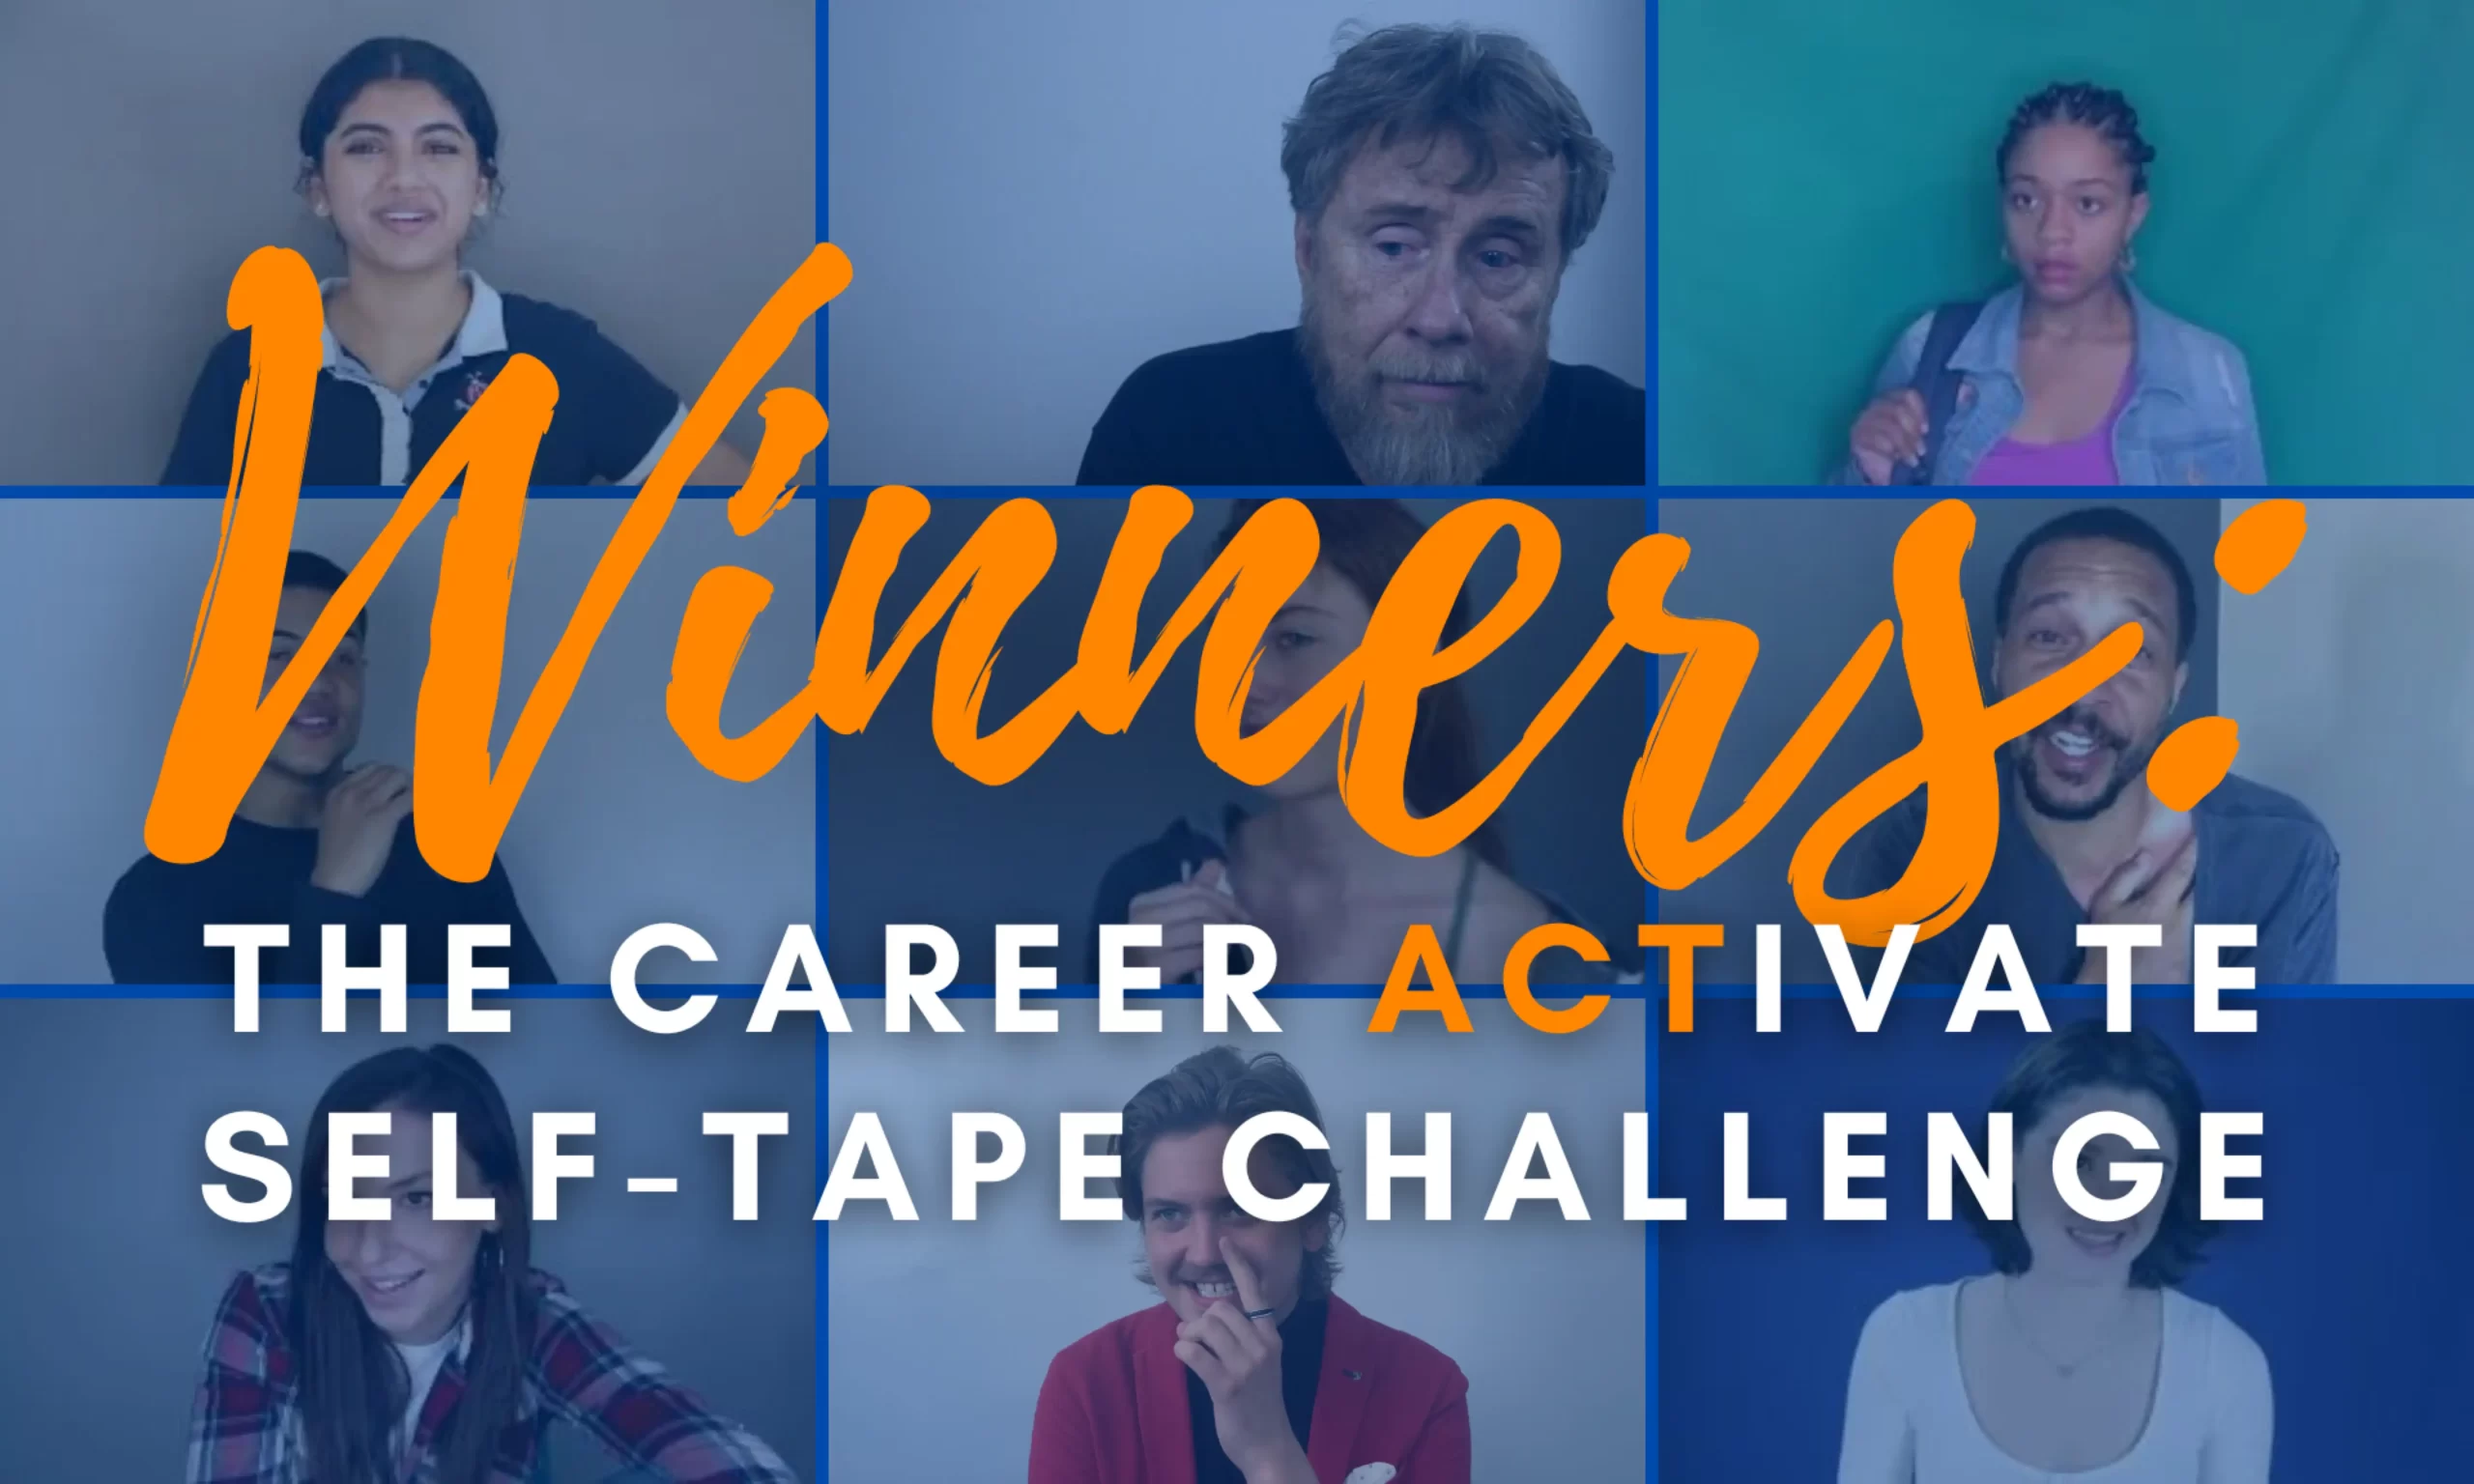 The 9 Winners of The Career ACTivate Self-Tape Challenge